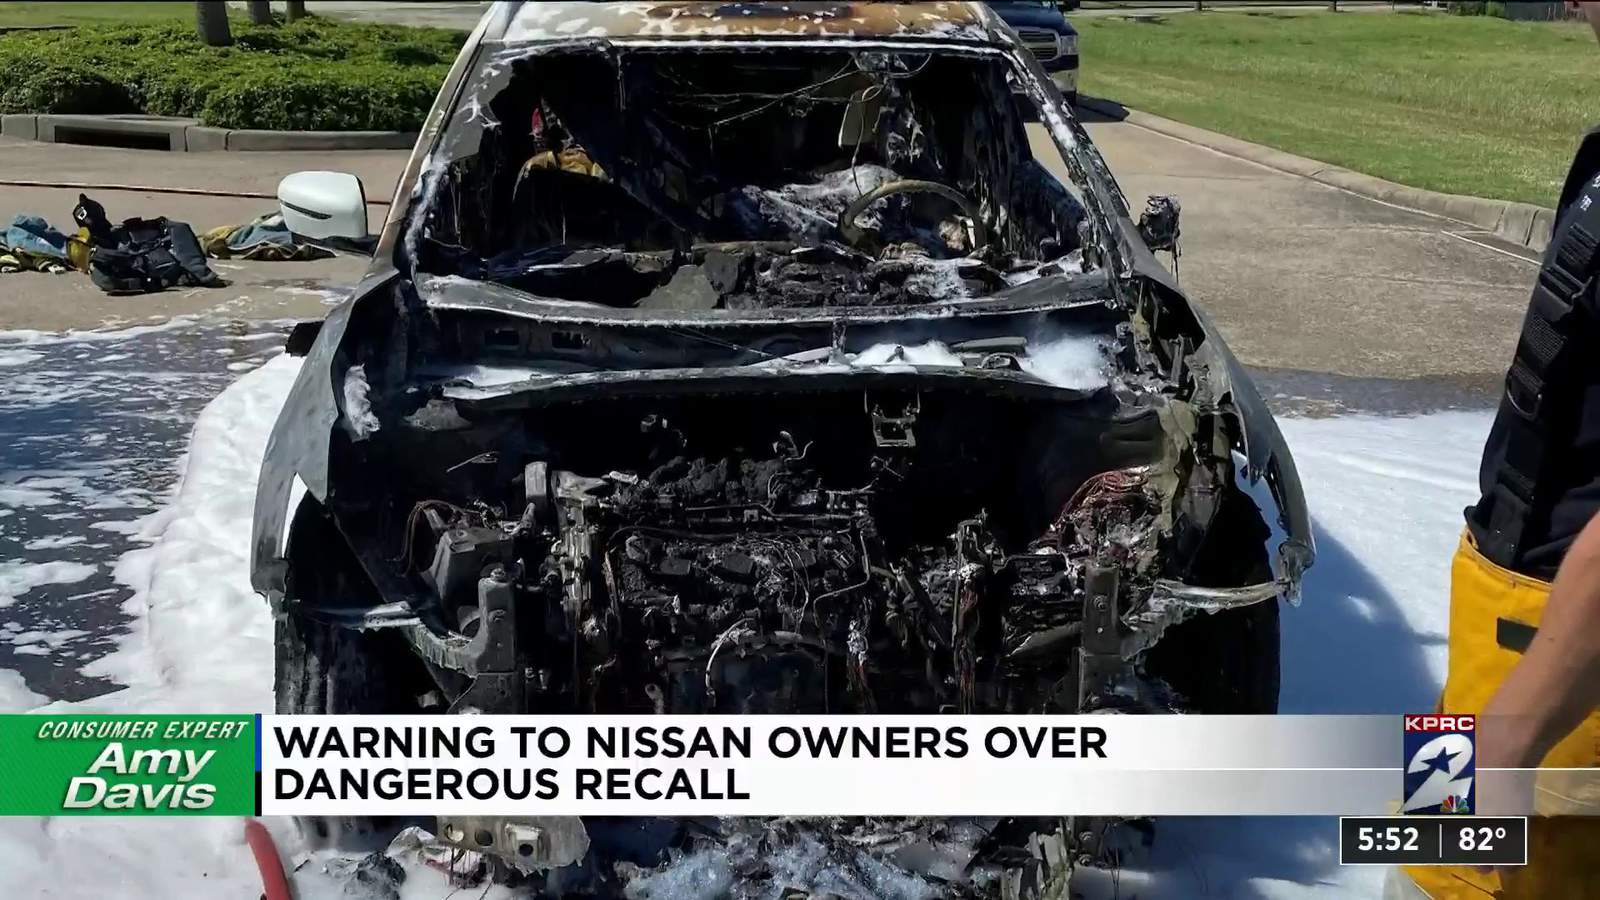 Nearly 400,000 vehicles on the road could catch fire and there is no fix for the problem